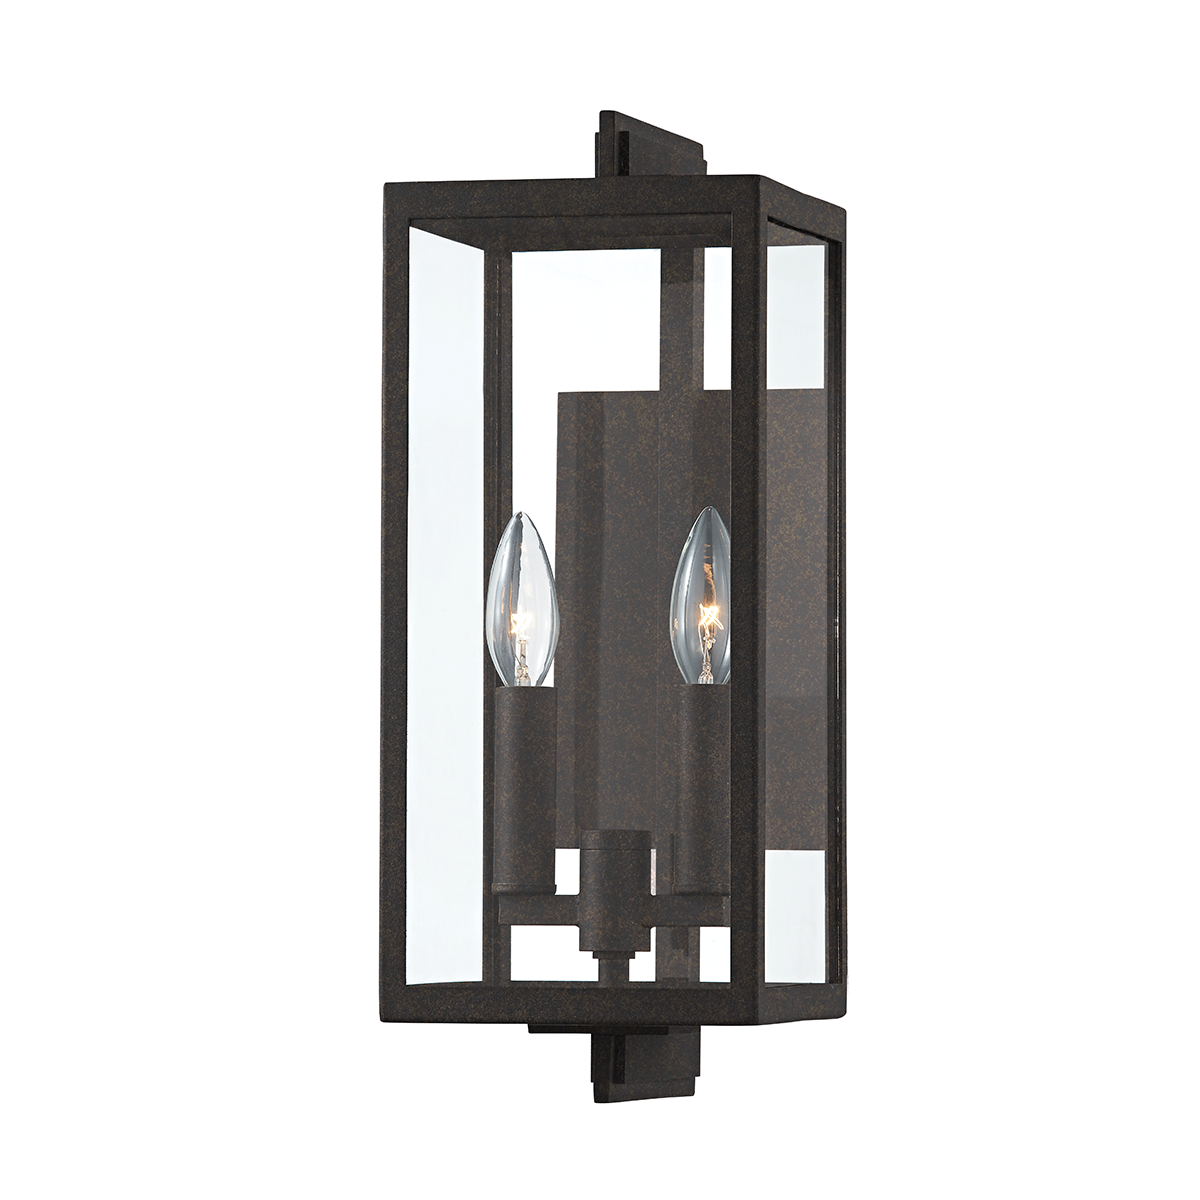 Troy Lighting 2 LIGHT EXTERIOR WALL SCONCE B5512 Outdoor l Wall Troy Lighting FRENCH IRON  